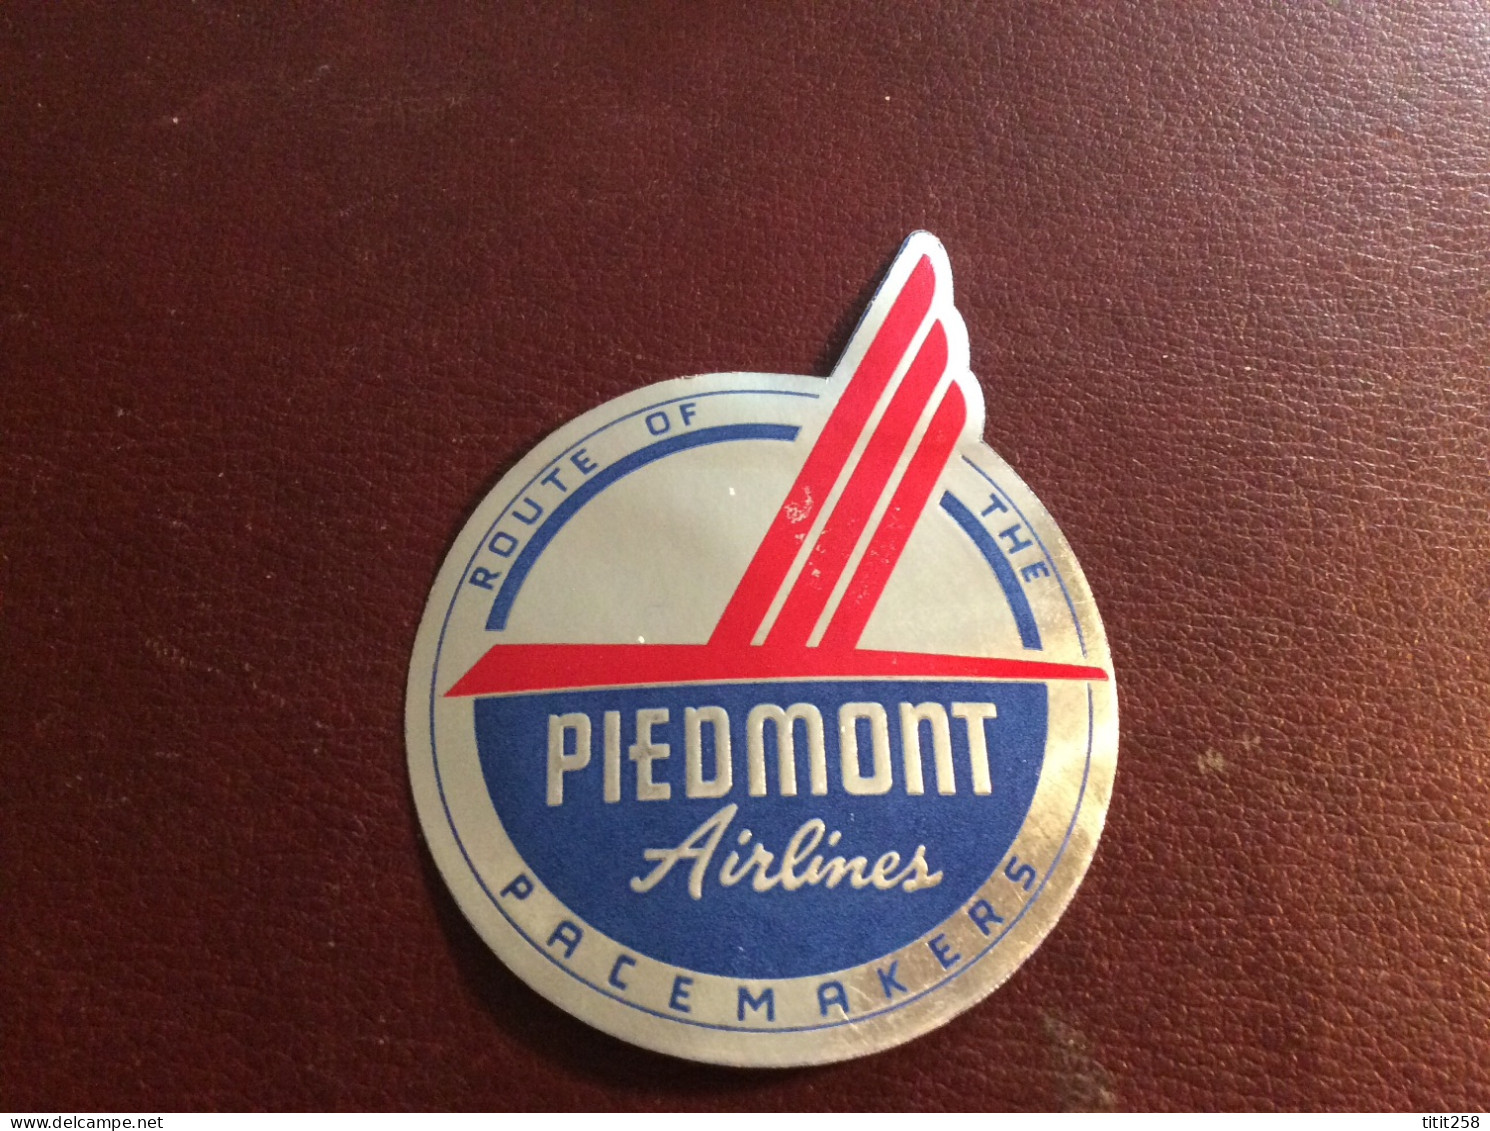 PIEDMONT AIRLINES ROUTE OF THE / PACEMAKERS  ( Avions Aéroports ) - Baggage Etiketten